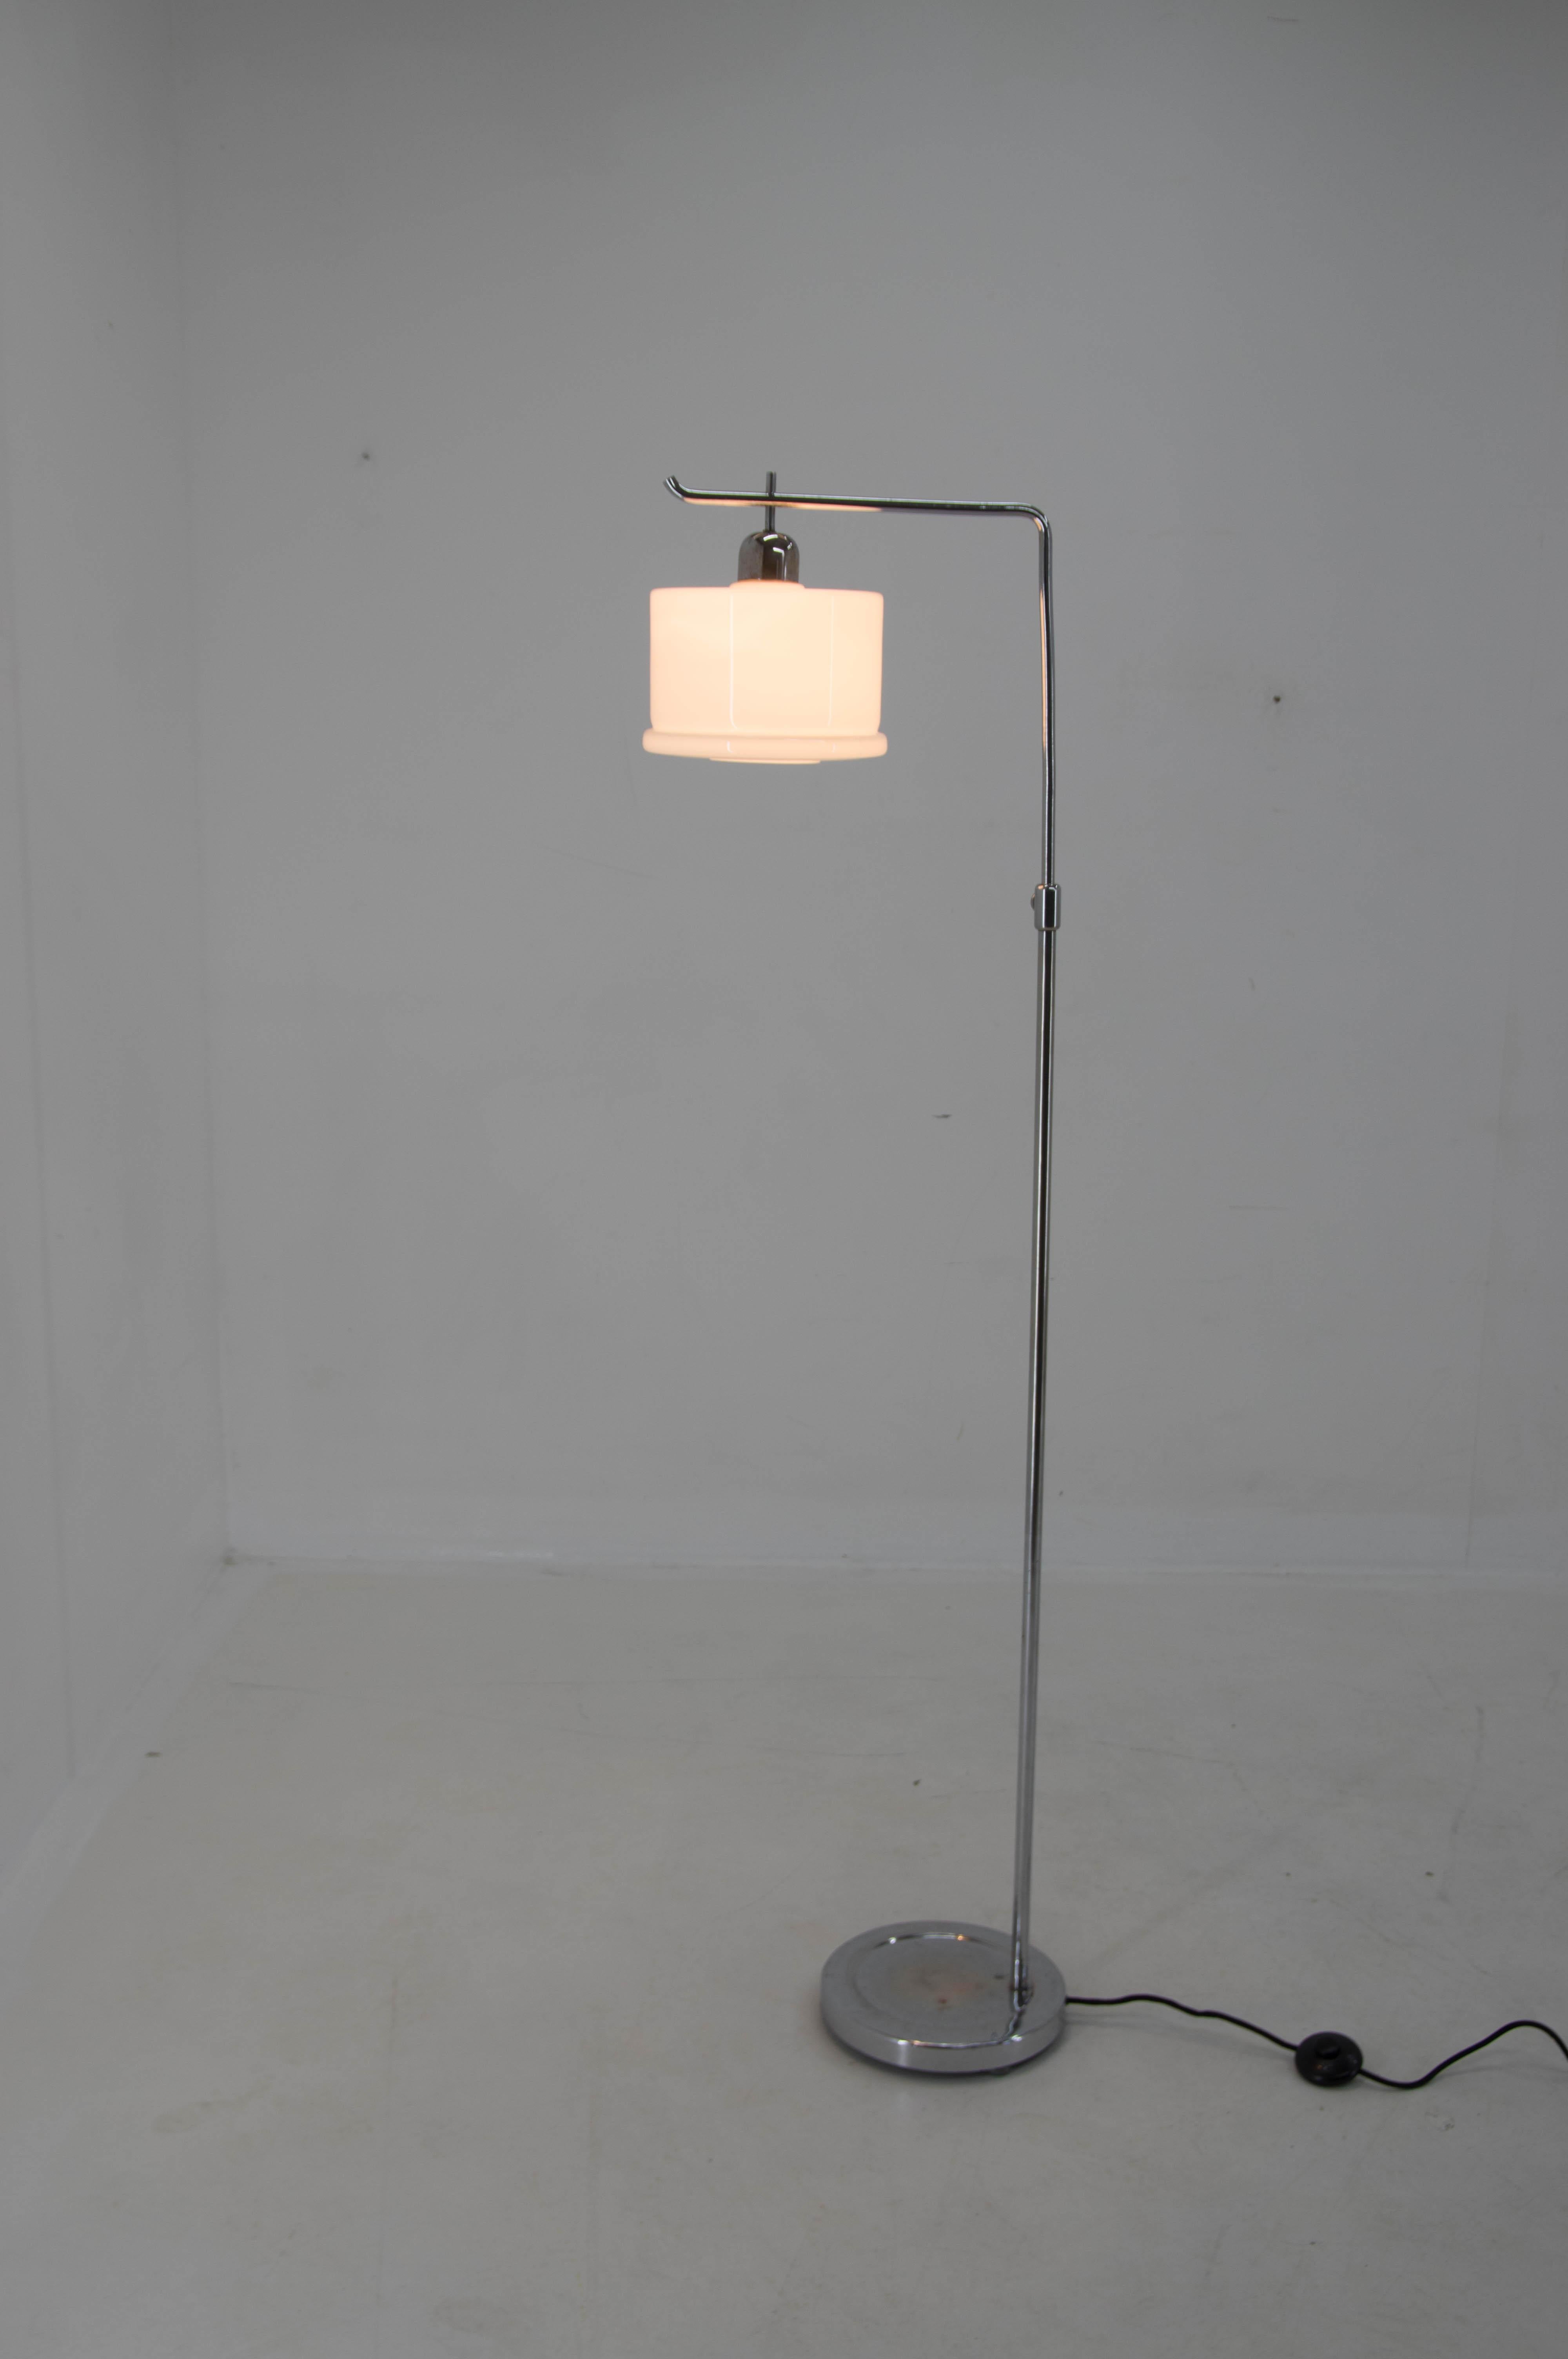 Bauhaus / Functionalist floor lamp with adjustable height.
Minimum height: 167cm
Rewired: 1x60W, E25-E27 bulb
US plug adapter included.